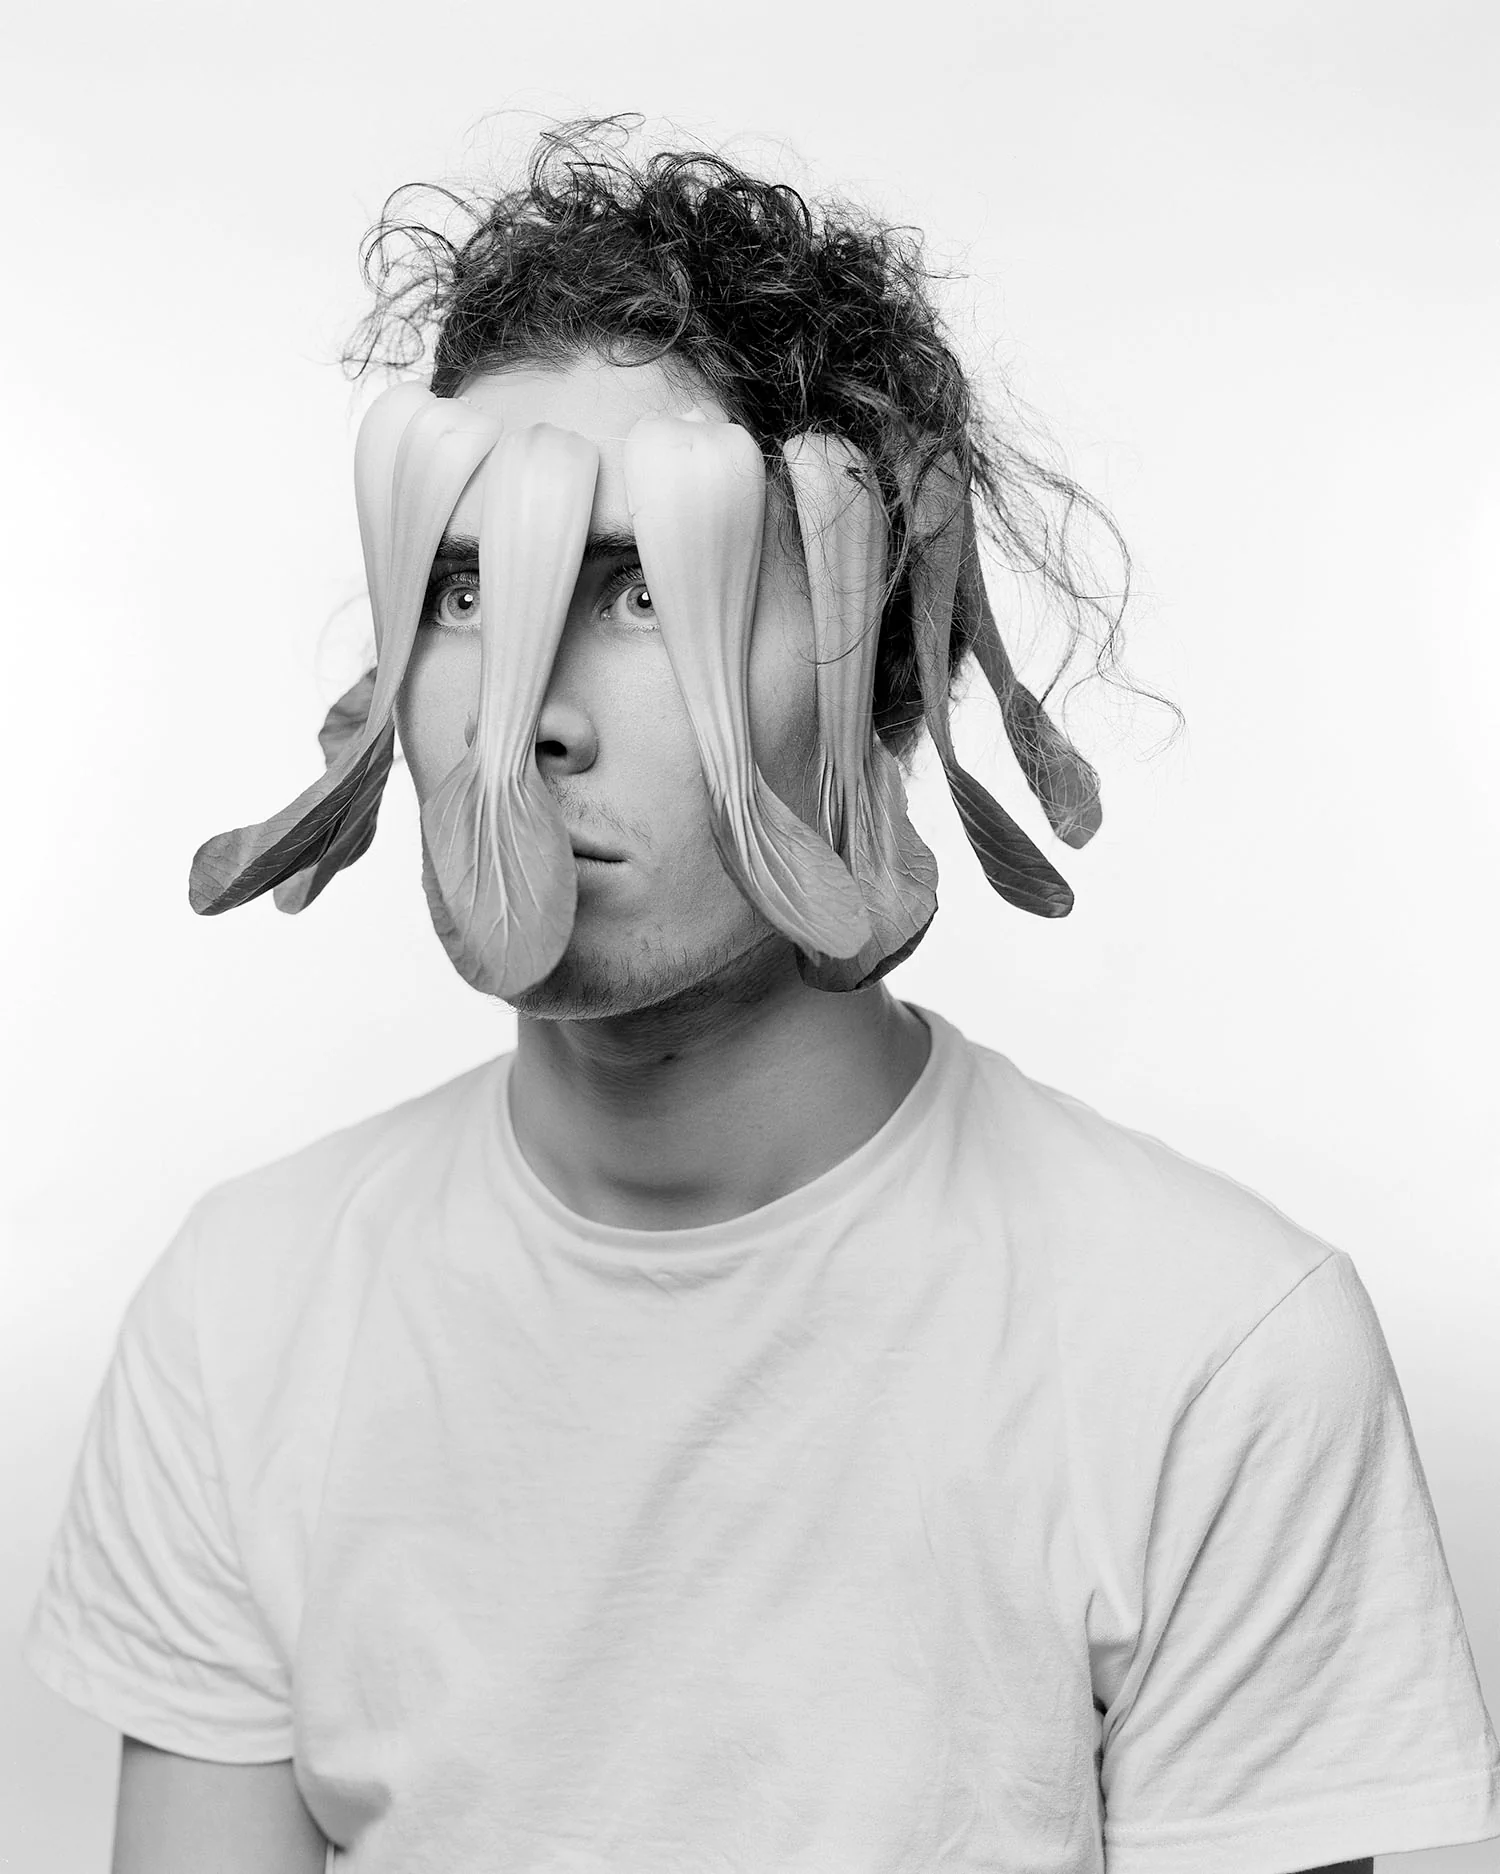 Large format black and white portrait of young man with pak choi as face shield